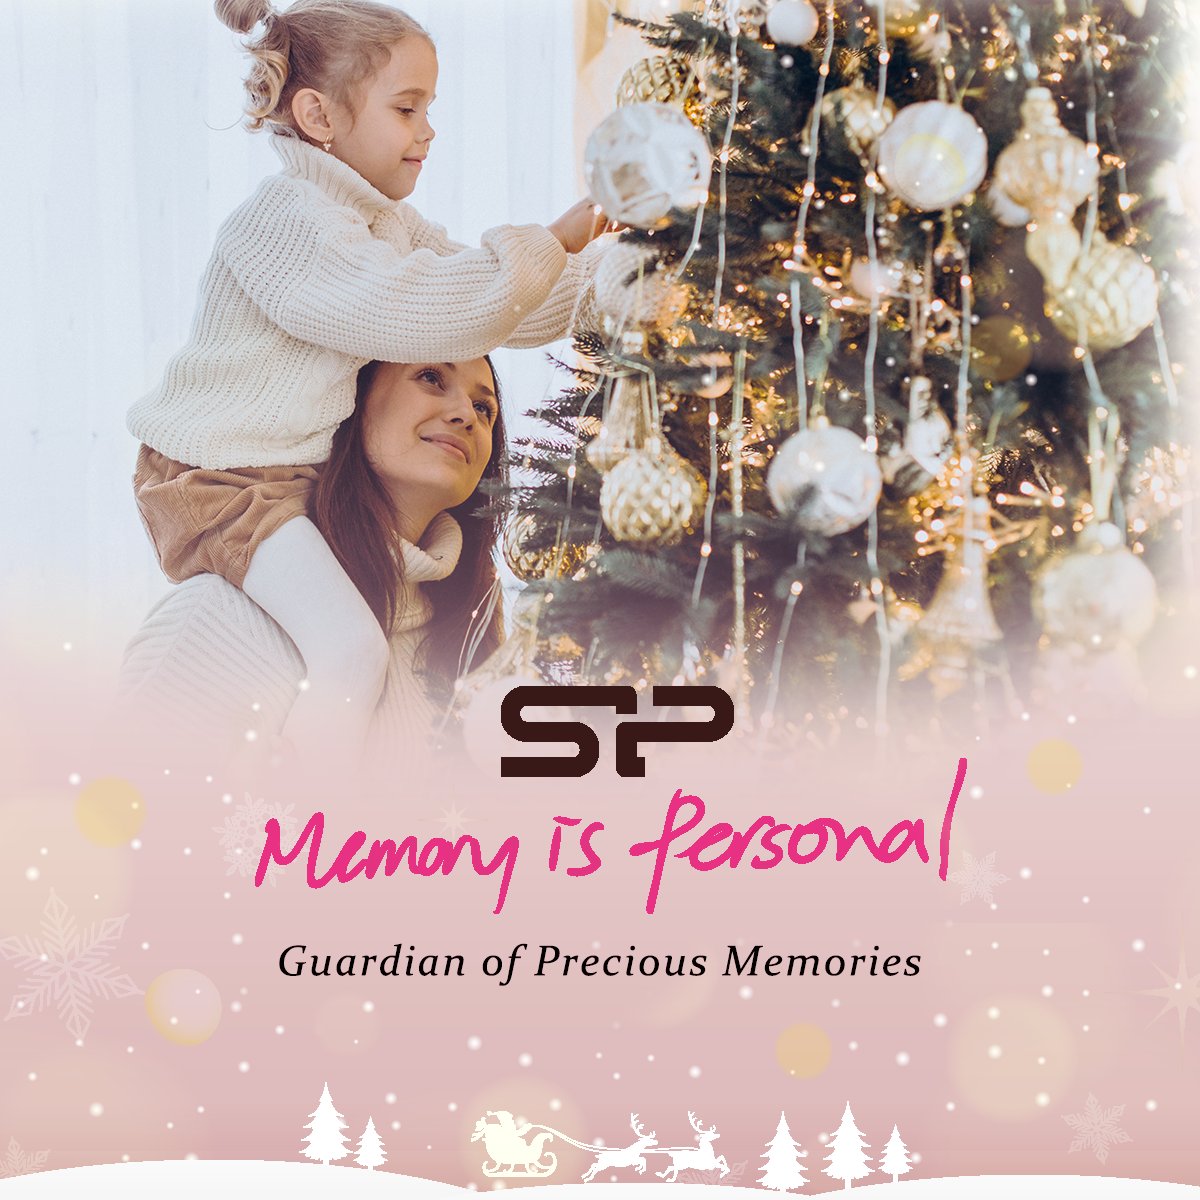 🎄✨ Christmas Time! Gather with loved ones to create joyful memories. 🎉👨‍👩‍👧‍👦 Every laugh, every moment, we're here to keep them safe for you. 📸💖 Let's make this Christmas unforgettable! #memory_is_personal #SiliconPower #MemoryKeepers #Christmas 🎅🌟